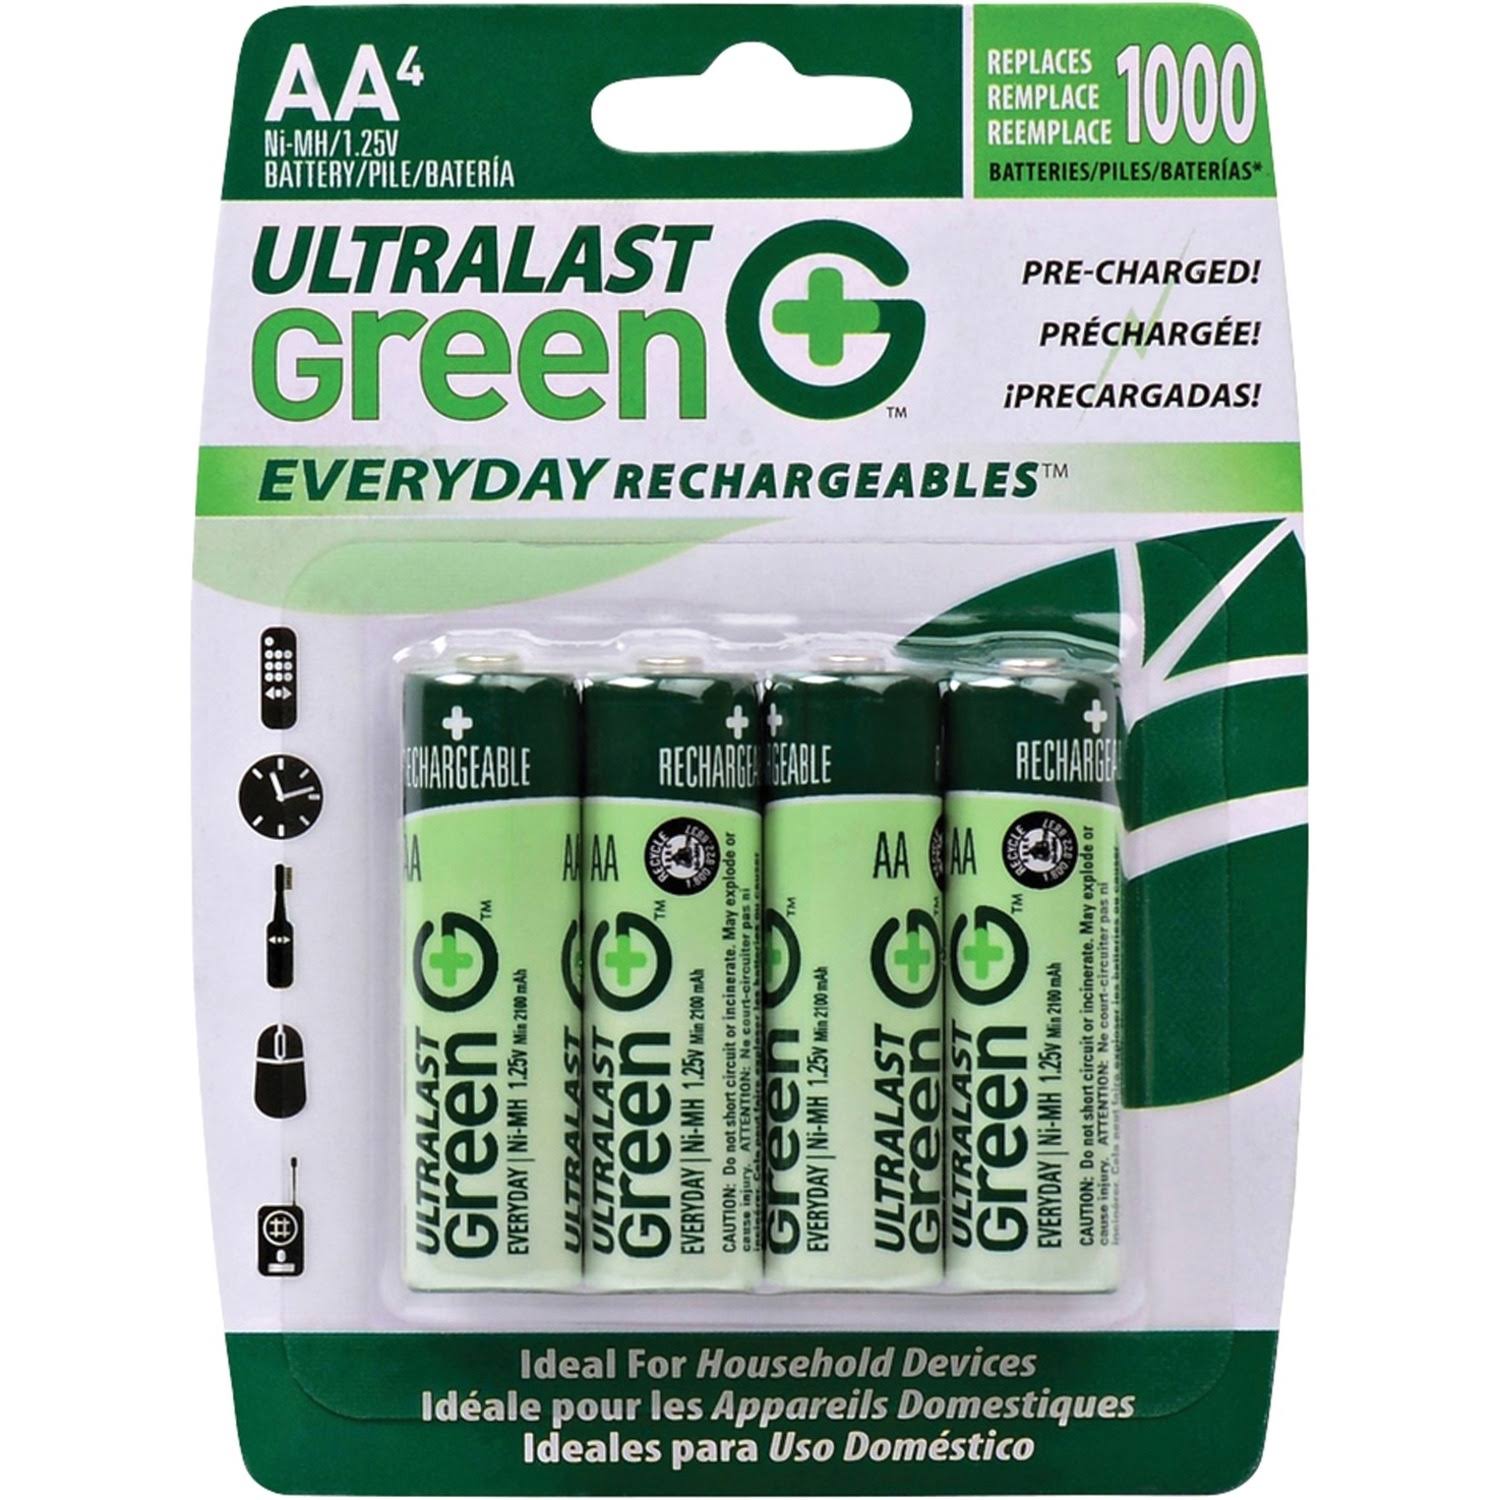 Ultralast Ulged4aa Green Precharged Ready-to-use Rechargeable Batteries - AA, 2100mAh